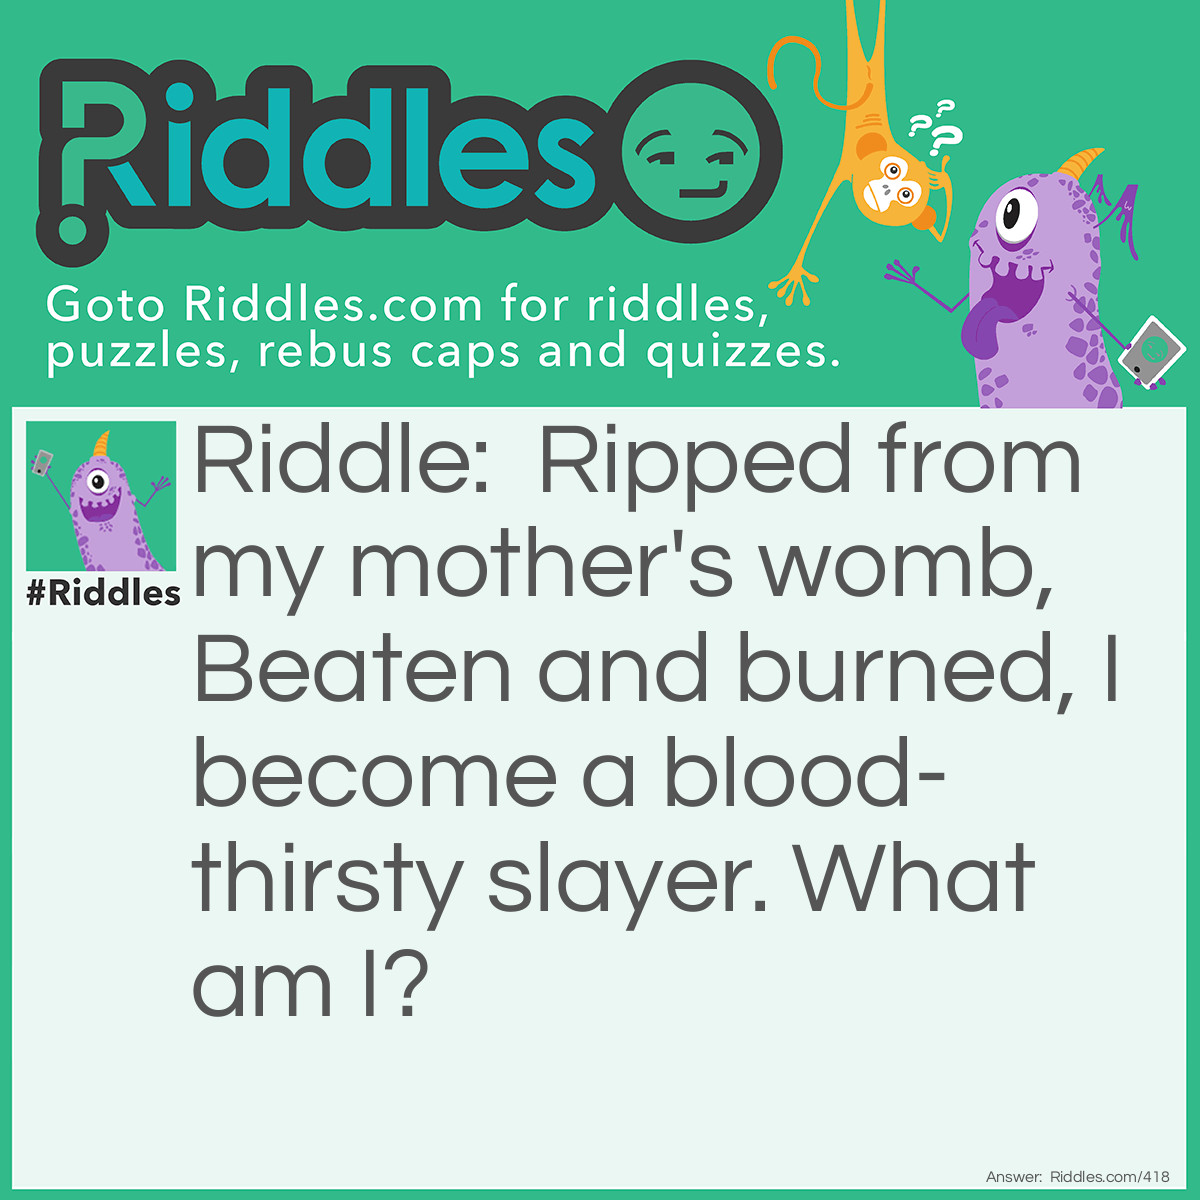 Riddle: Ripped from my mother's womb, Beaten and burned, I become a blood-thirsty slayer. What am I? Answer: Iron ore.